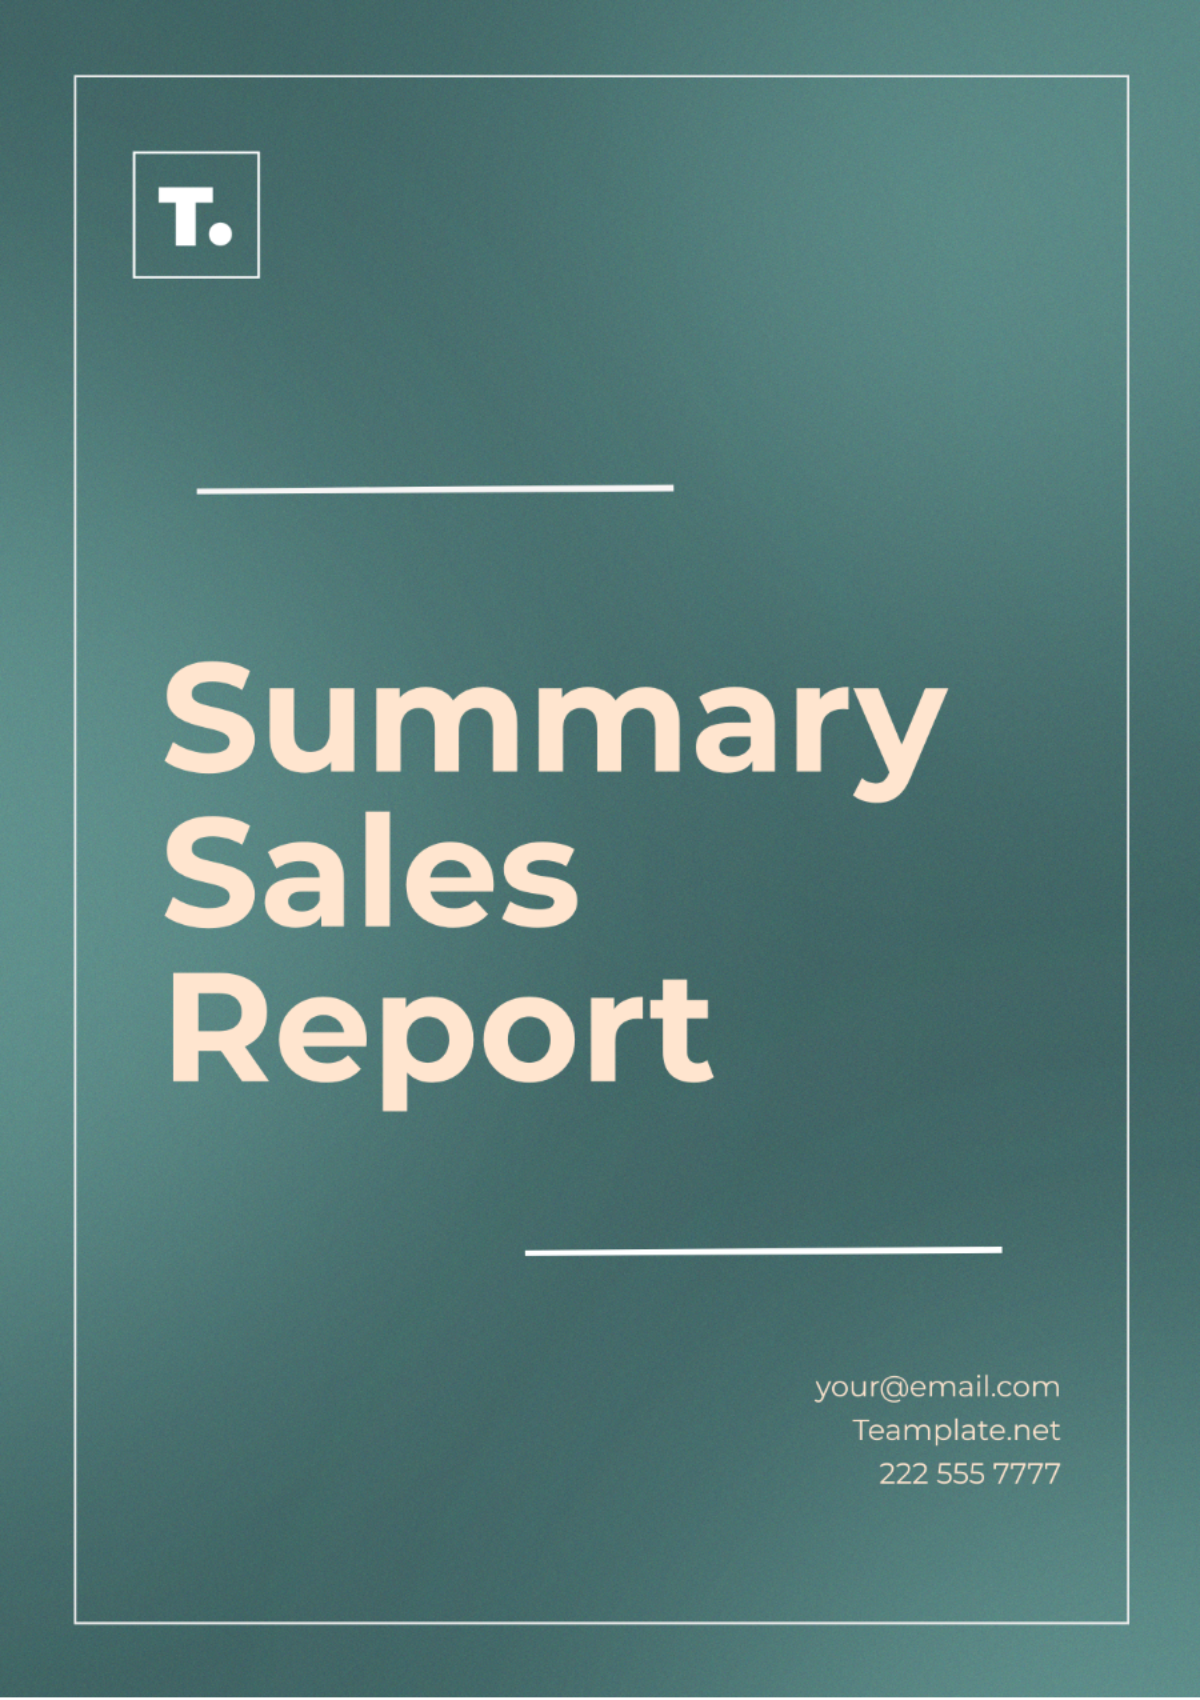 Summary Sales Report Template